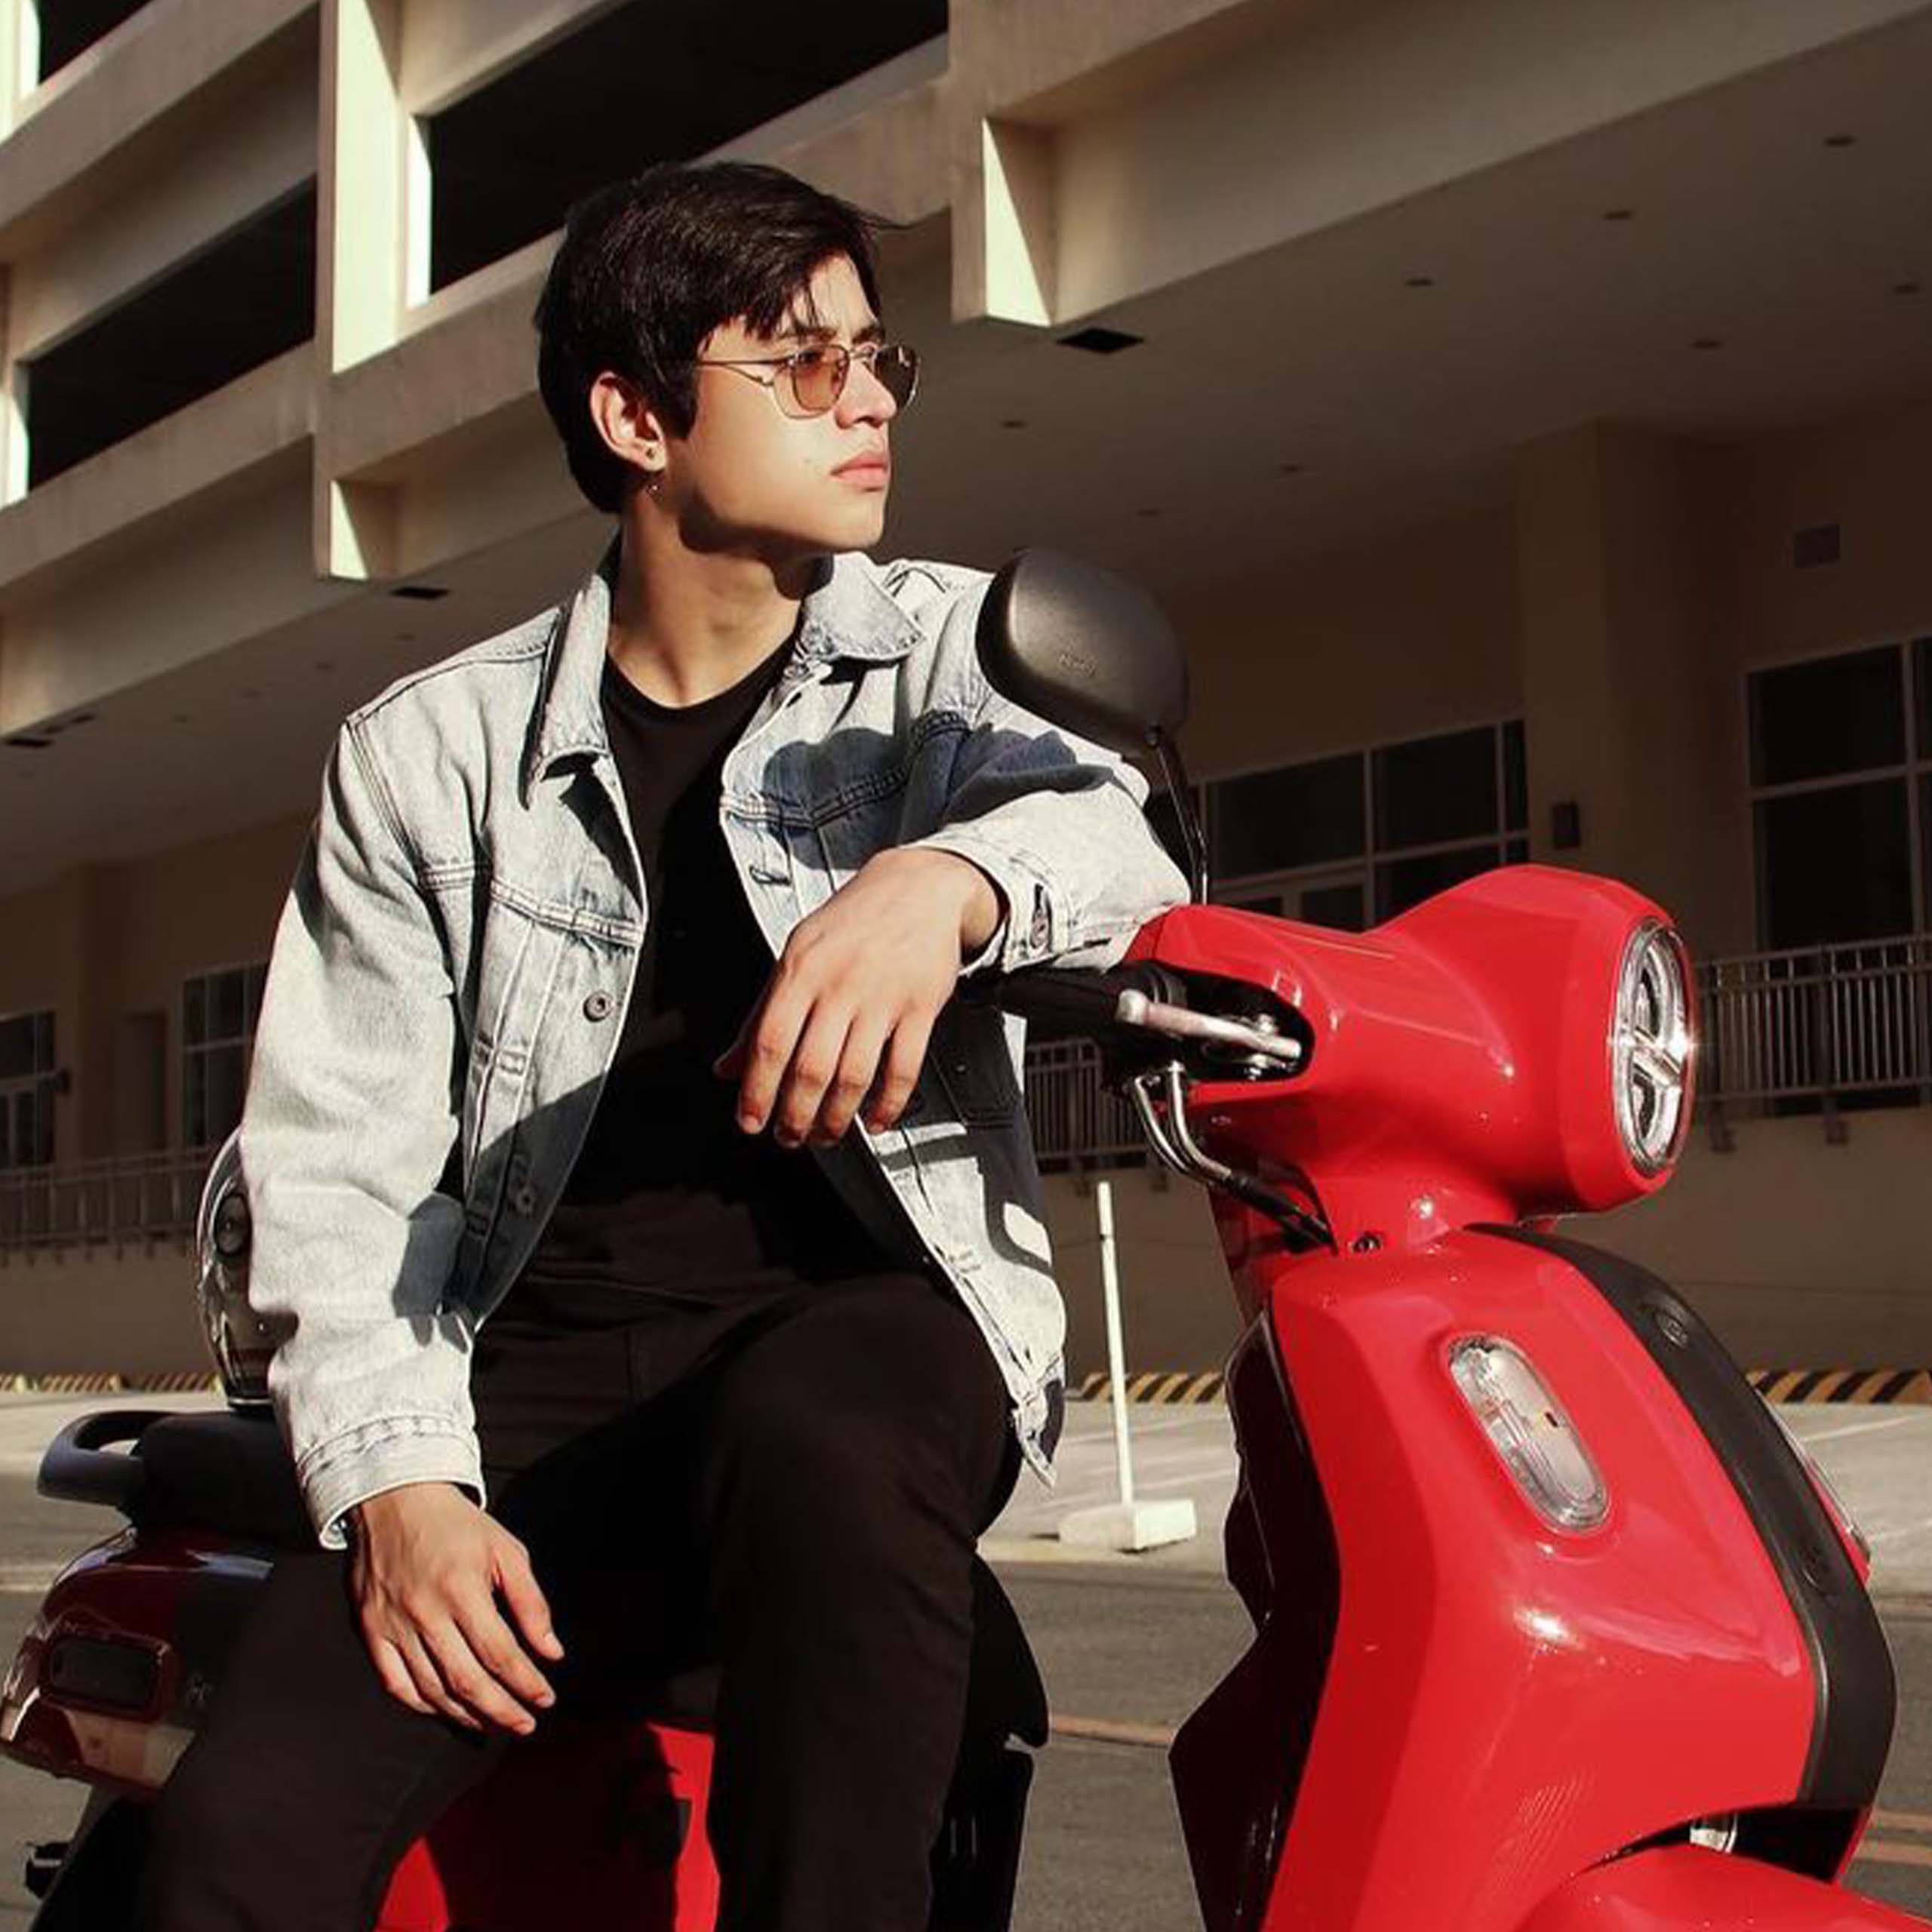 Exclusive: Kelvin Miranda Shares How His Dad Inspired His Passion For Motorcycles